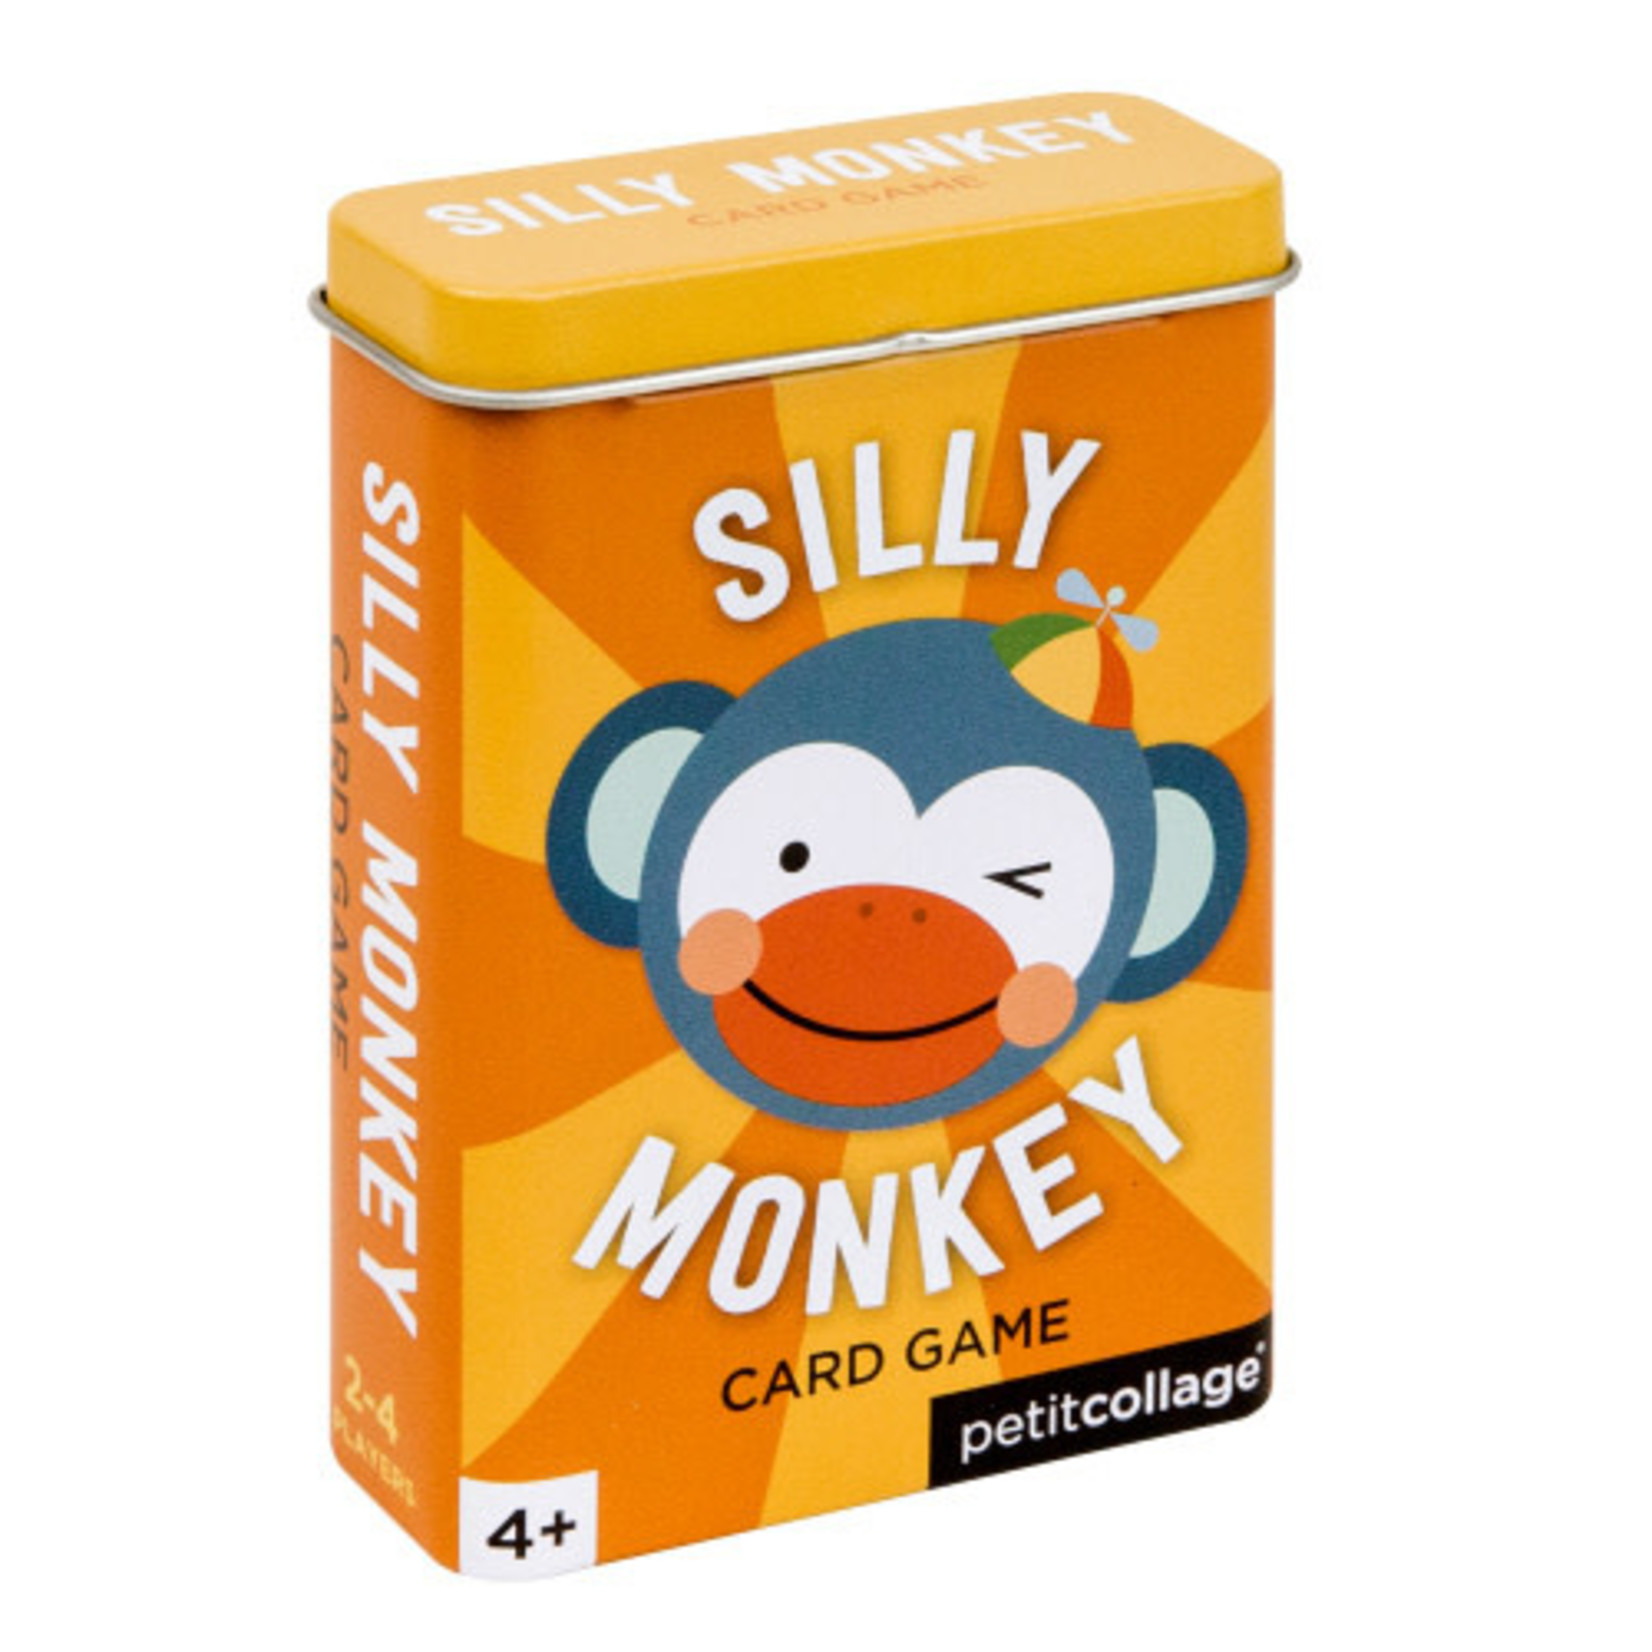 Chronicle SILLY MONKEY CARD GAME